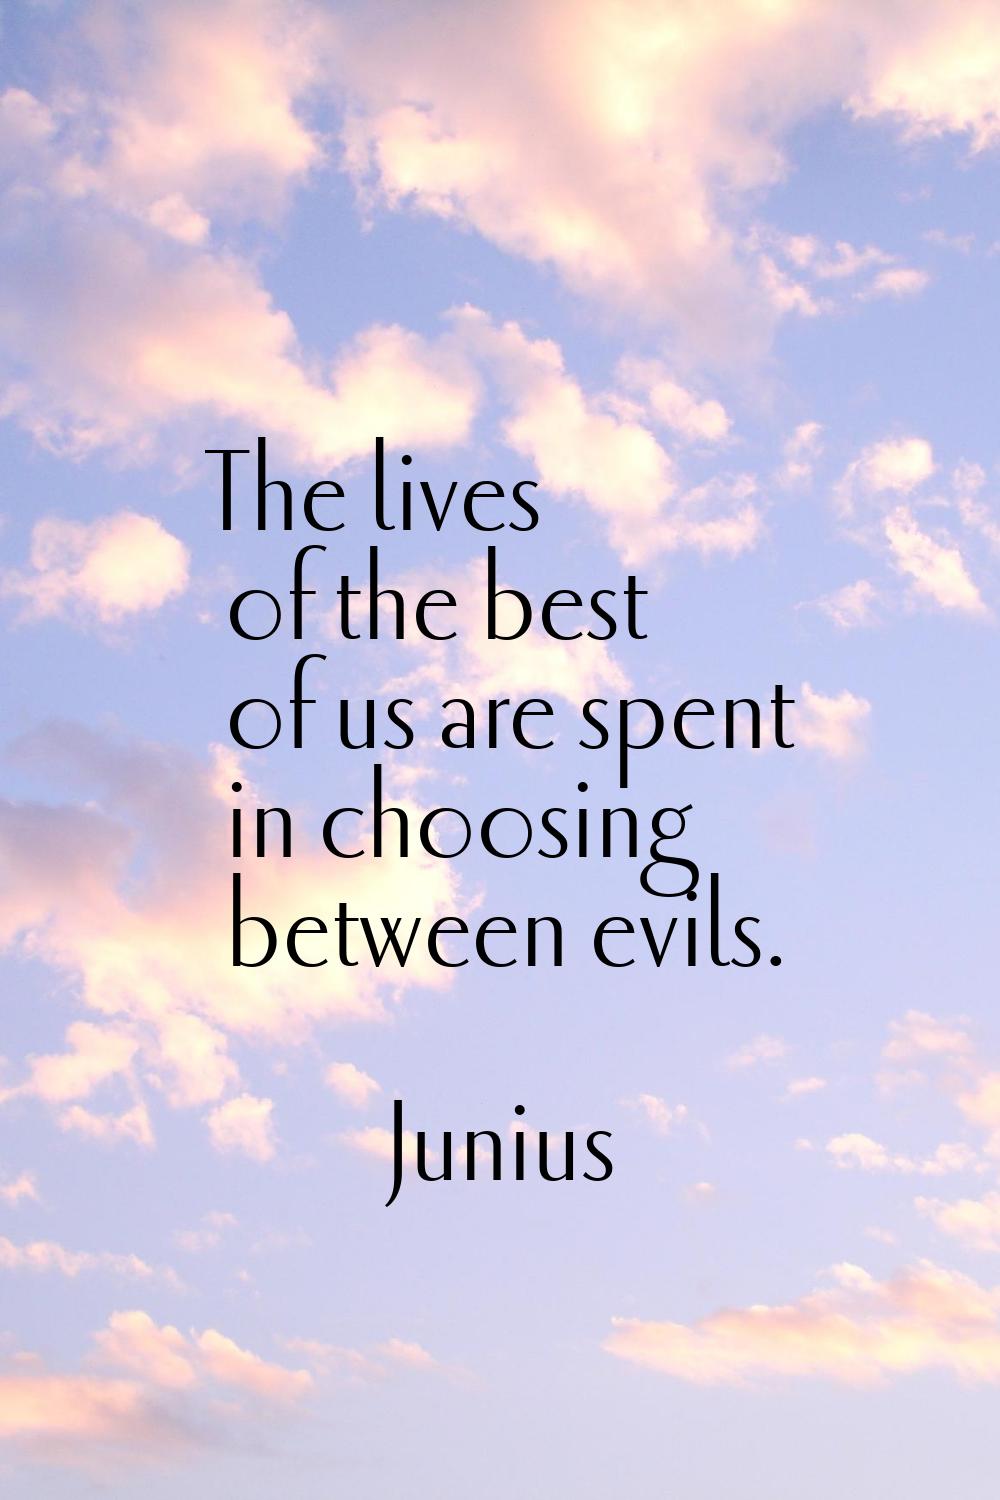 The lives of the best of us are spent in choosing between evils.